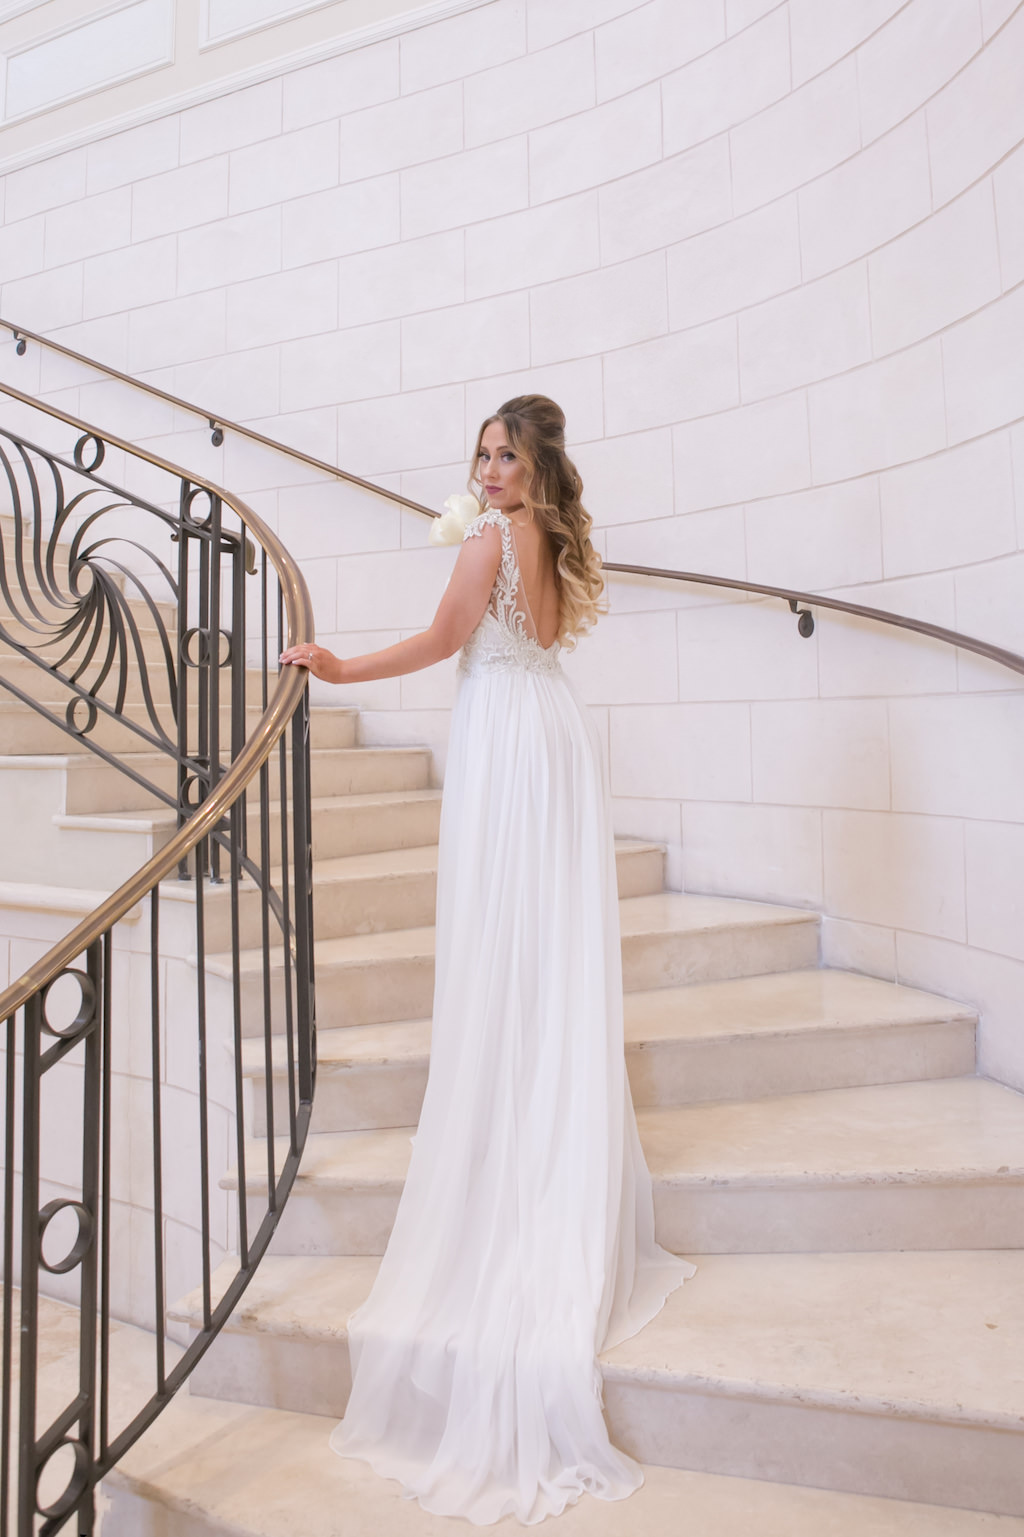 Bridal Portrait on Staircase in Maggie Sottero A-Line Illusion Tank Top Low-Back Wedding Dress with Lace Applique and Rhinestone Beaded Bodice | Sarasota Wedding Photographer Carrie Wildes Photography